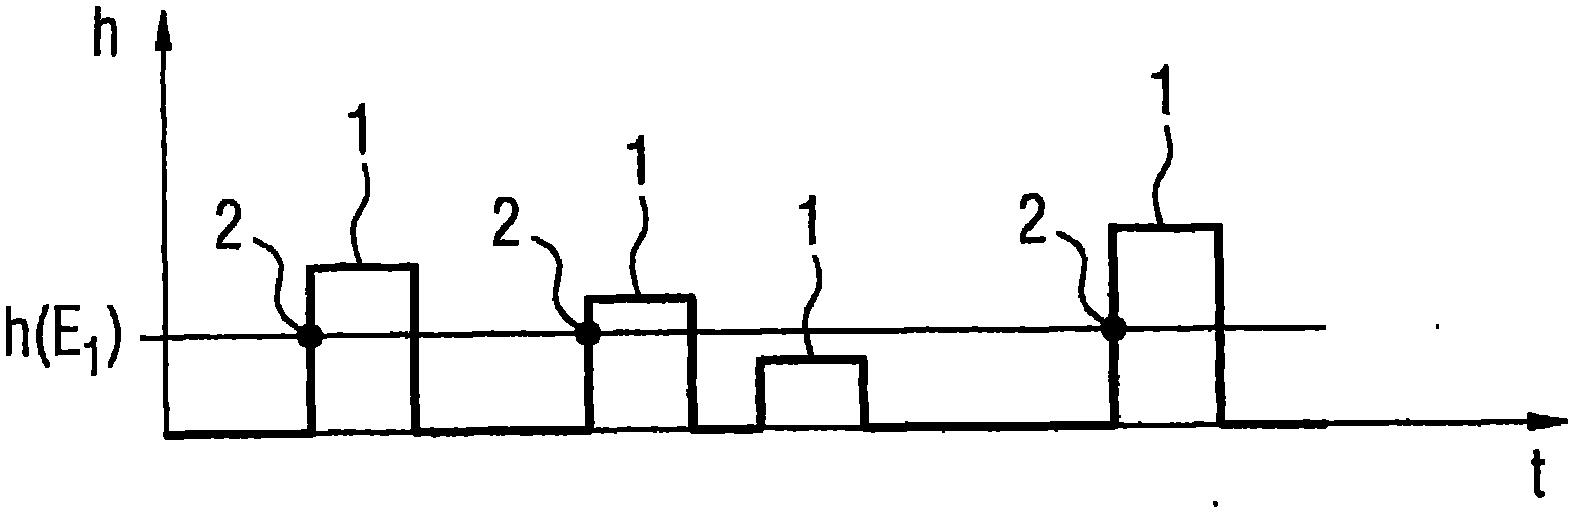 Circuit arrangement for counting x-ray radiation x-ray quanta by way of quanta-counting detectors, and also an application-specific integrated circuit and an emitter-detector system